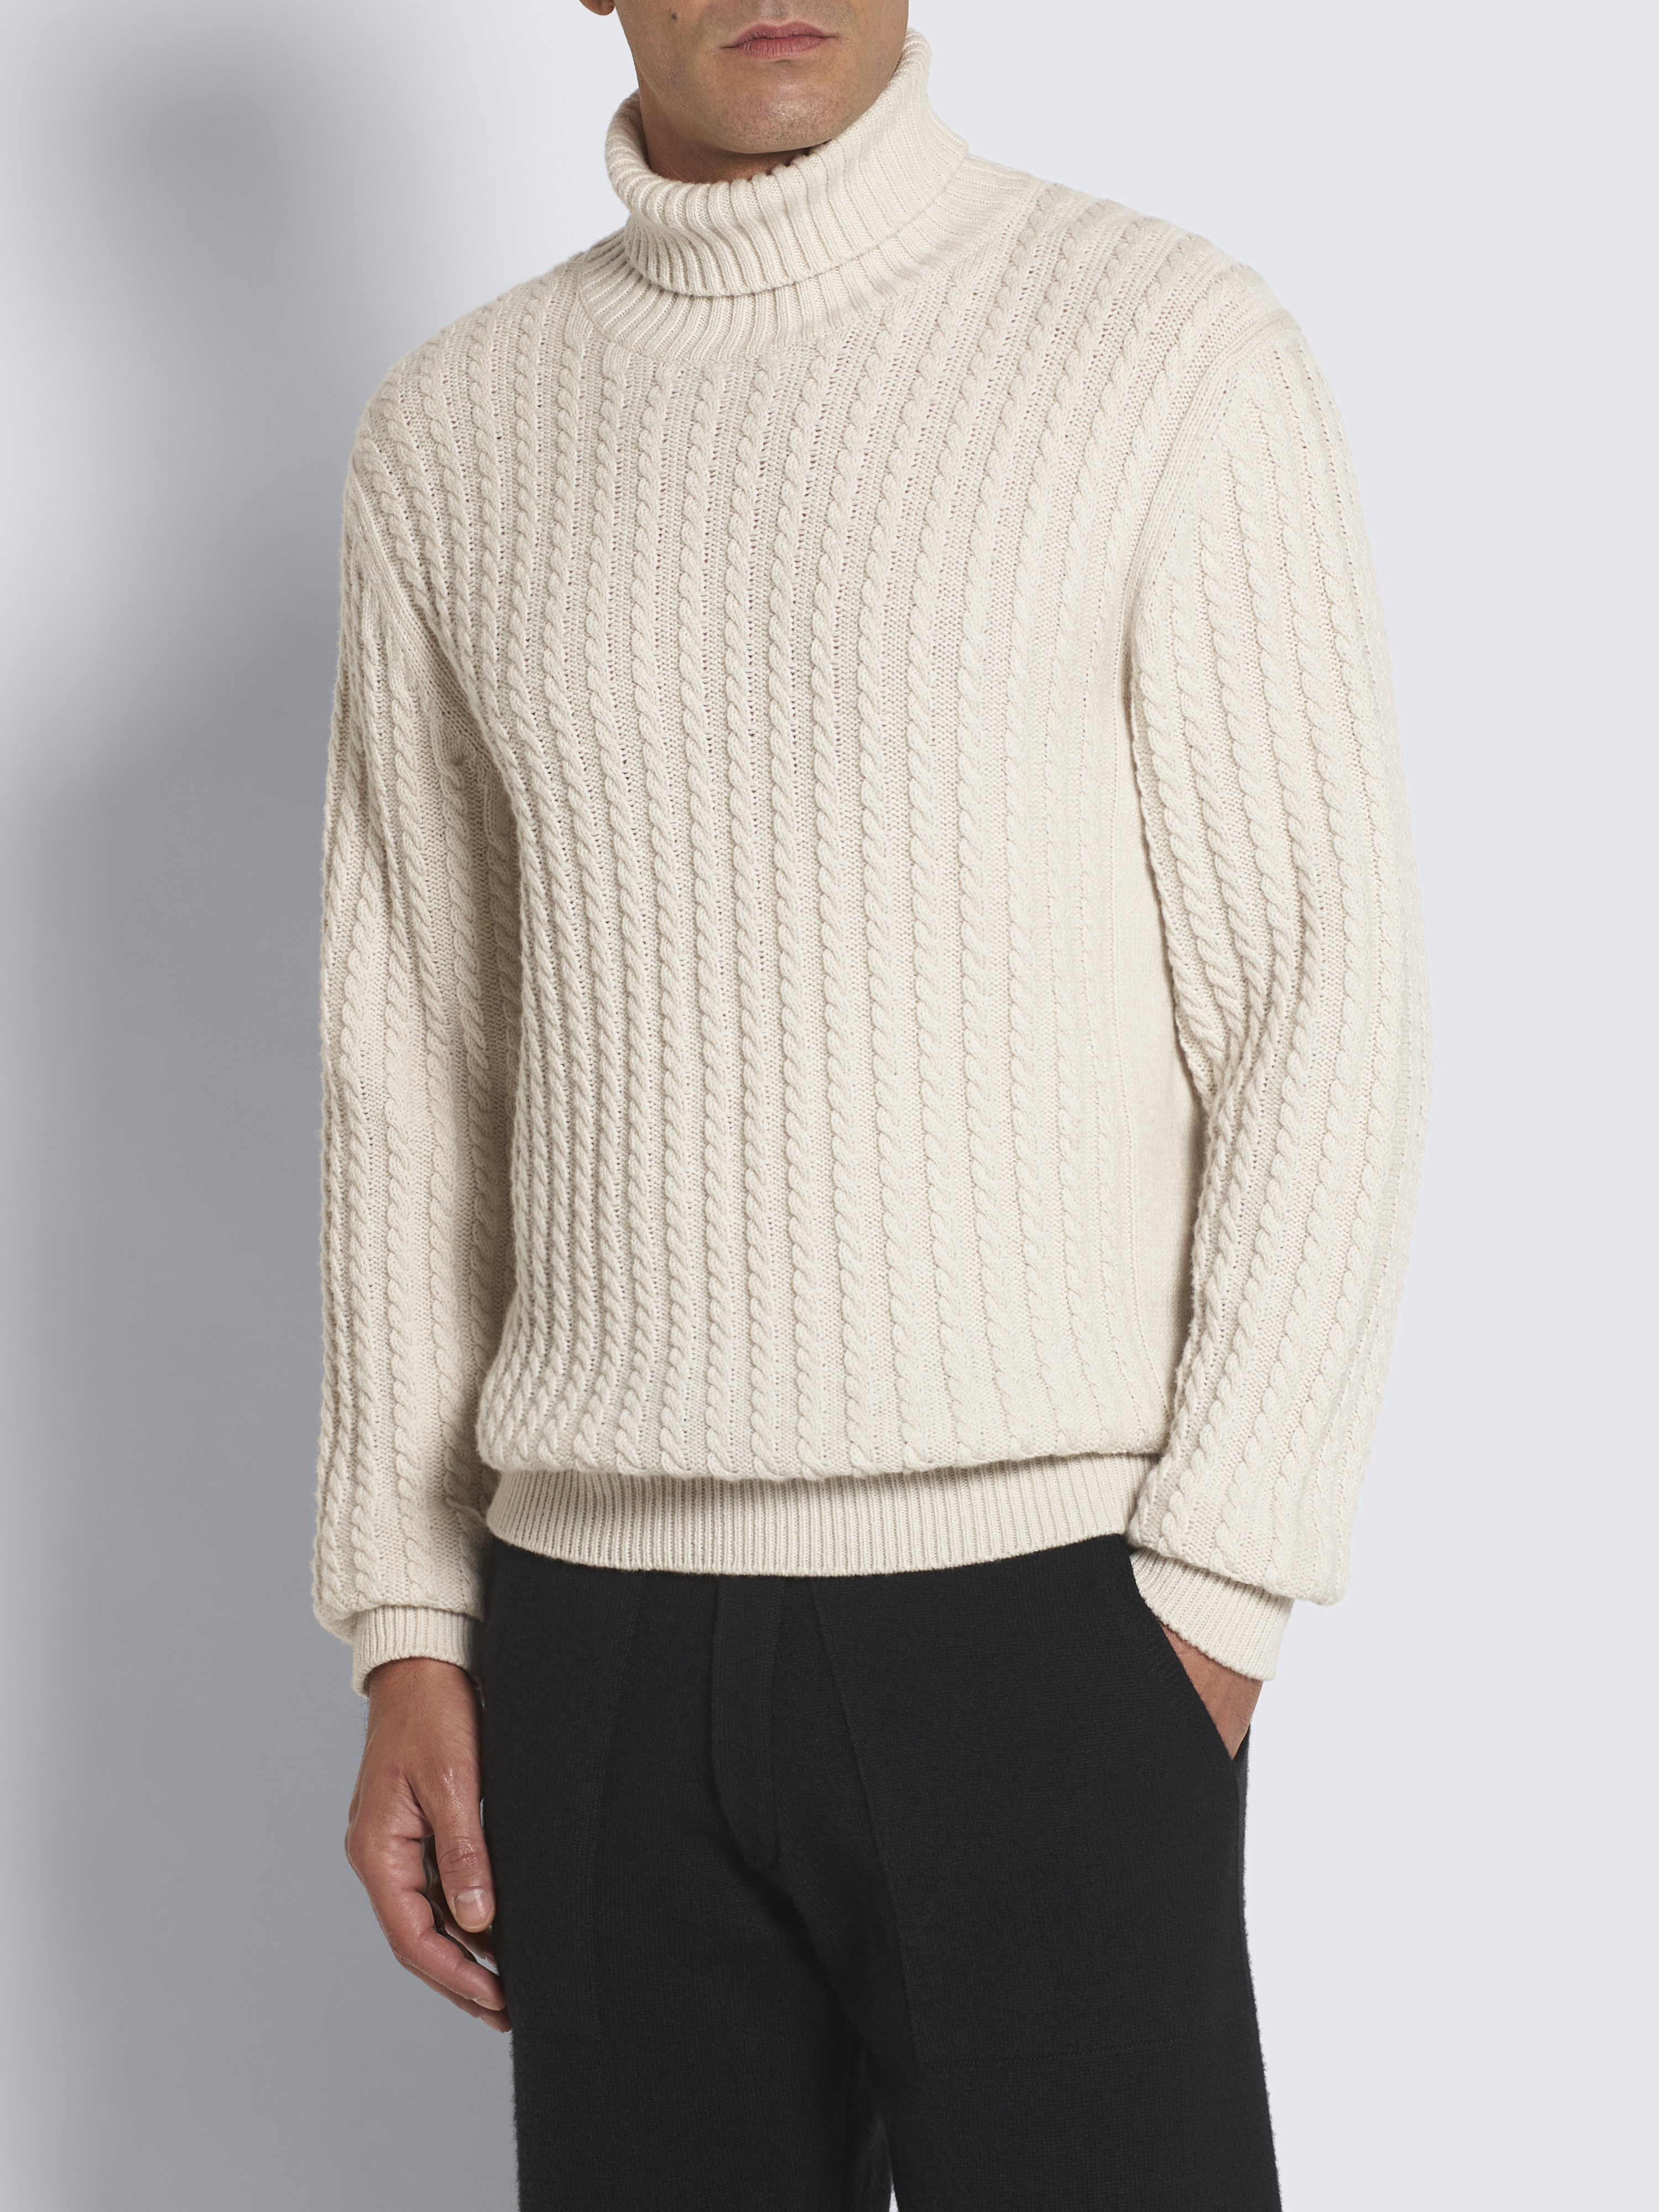 Knits | Brioni® GB Official Store